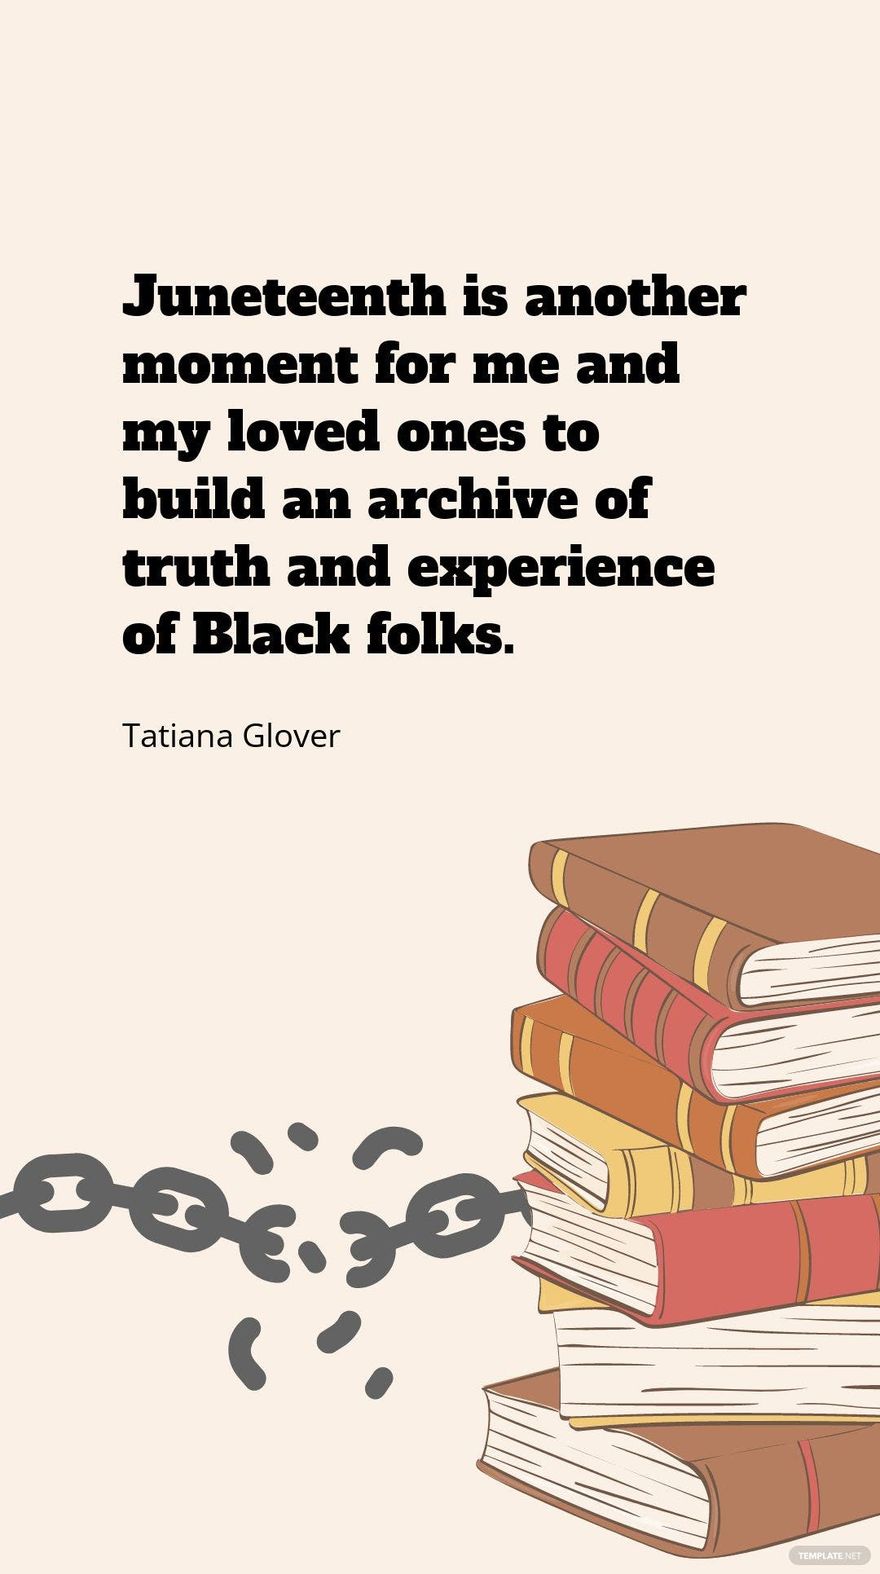 Tatiana Glover - Juneteenth is another moment for me and my loved ones to build an archive of truth and experience of Black folks.